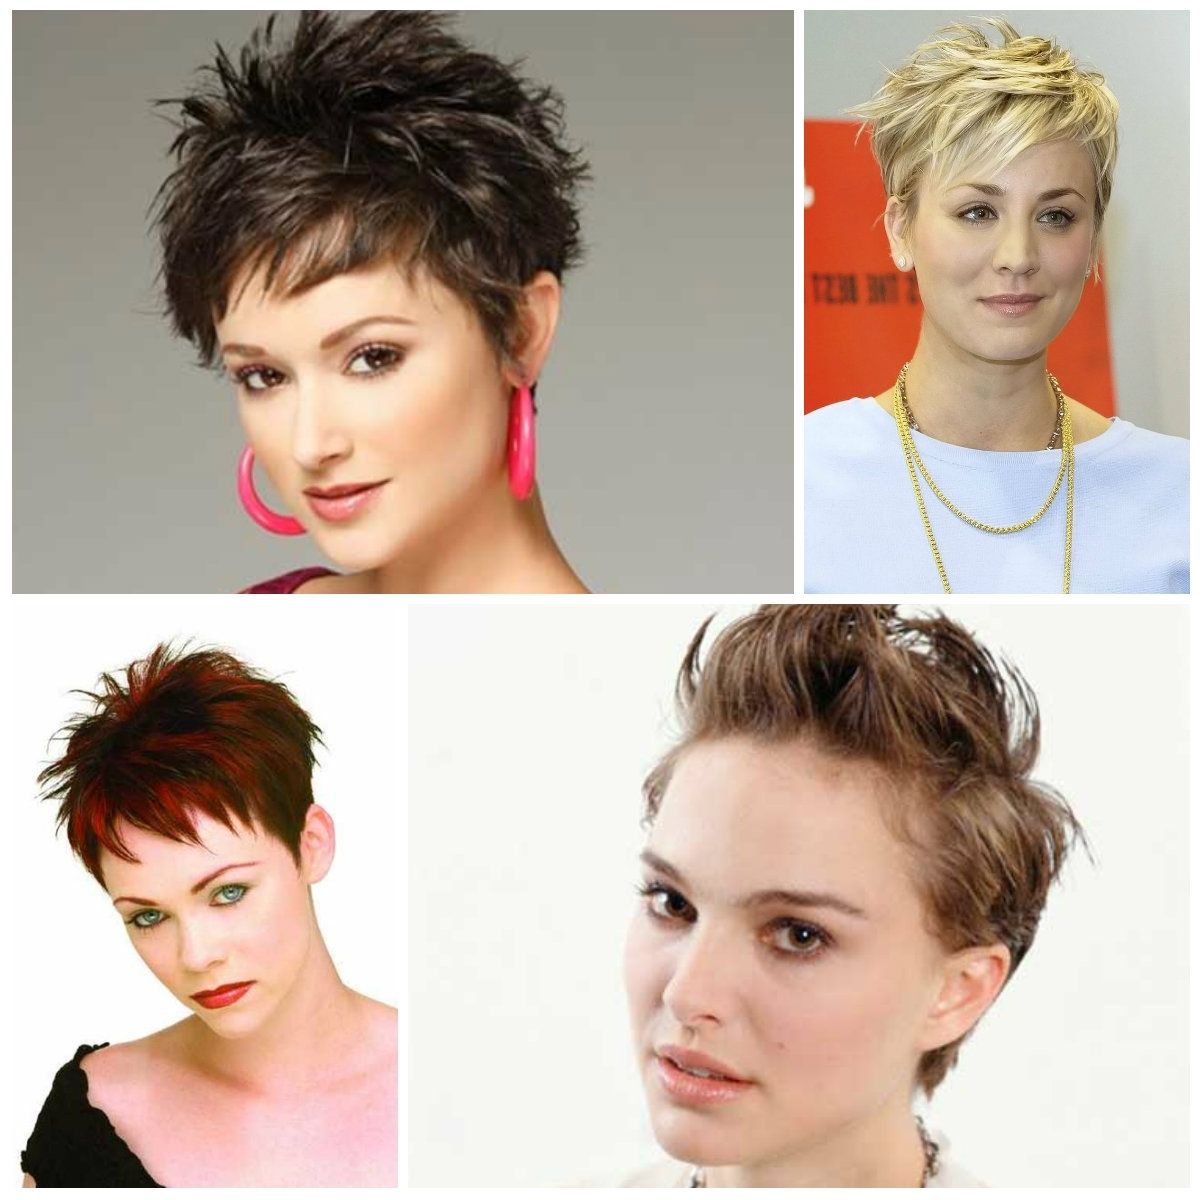 Pixie Hairstyles For 2017 – Hairstyles Ideas Intended For 2018 Long To Short Pixie Hairstyles (Photo 6 of 16)